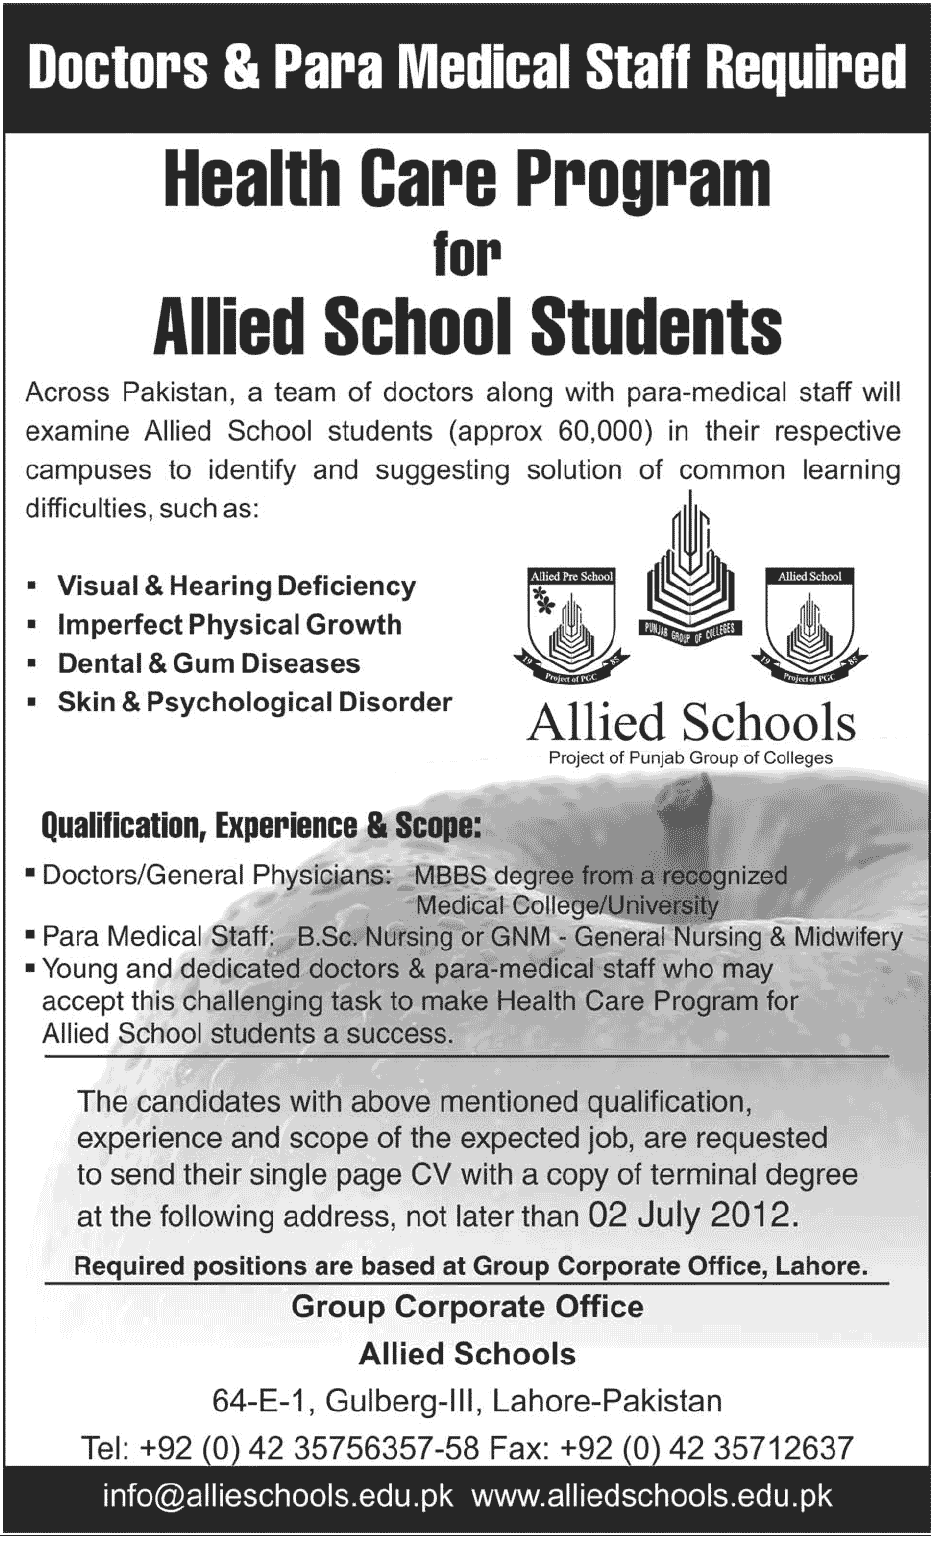 Doctors and Para-Medical Staff Required Under Health Care Program for Allied School Students